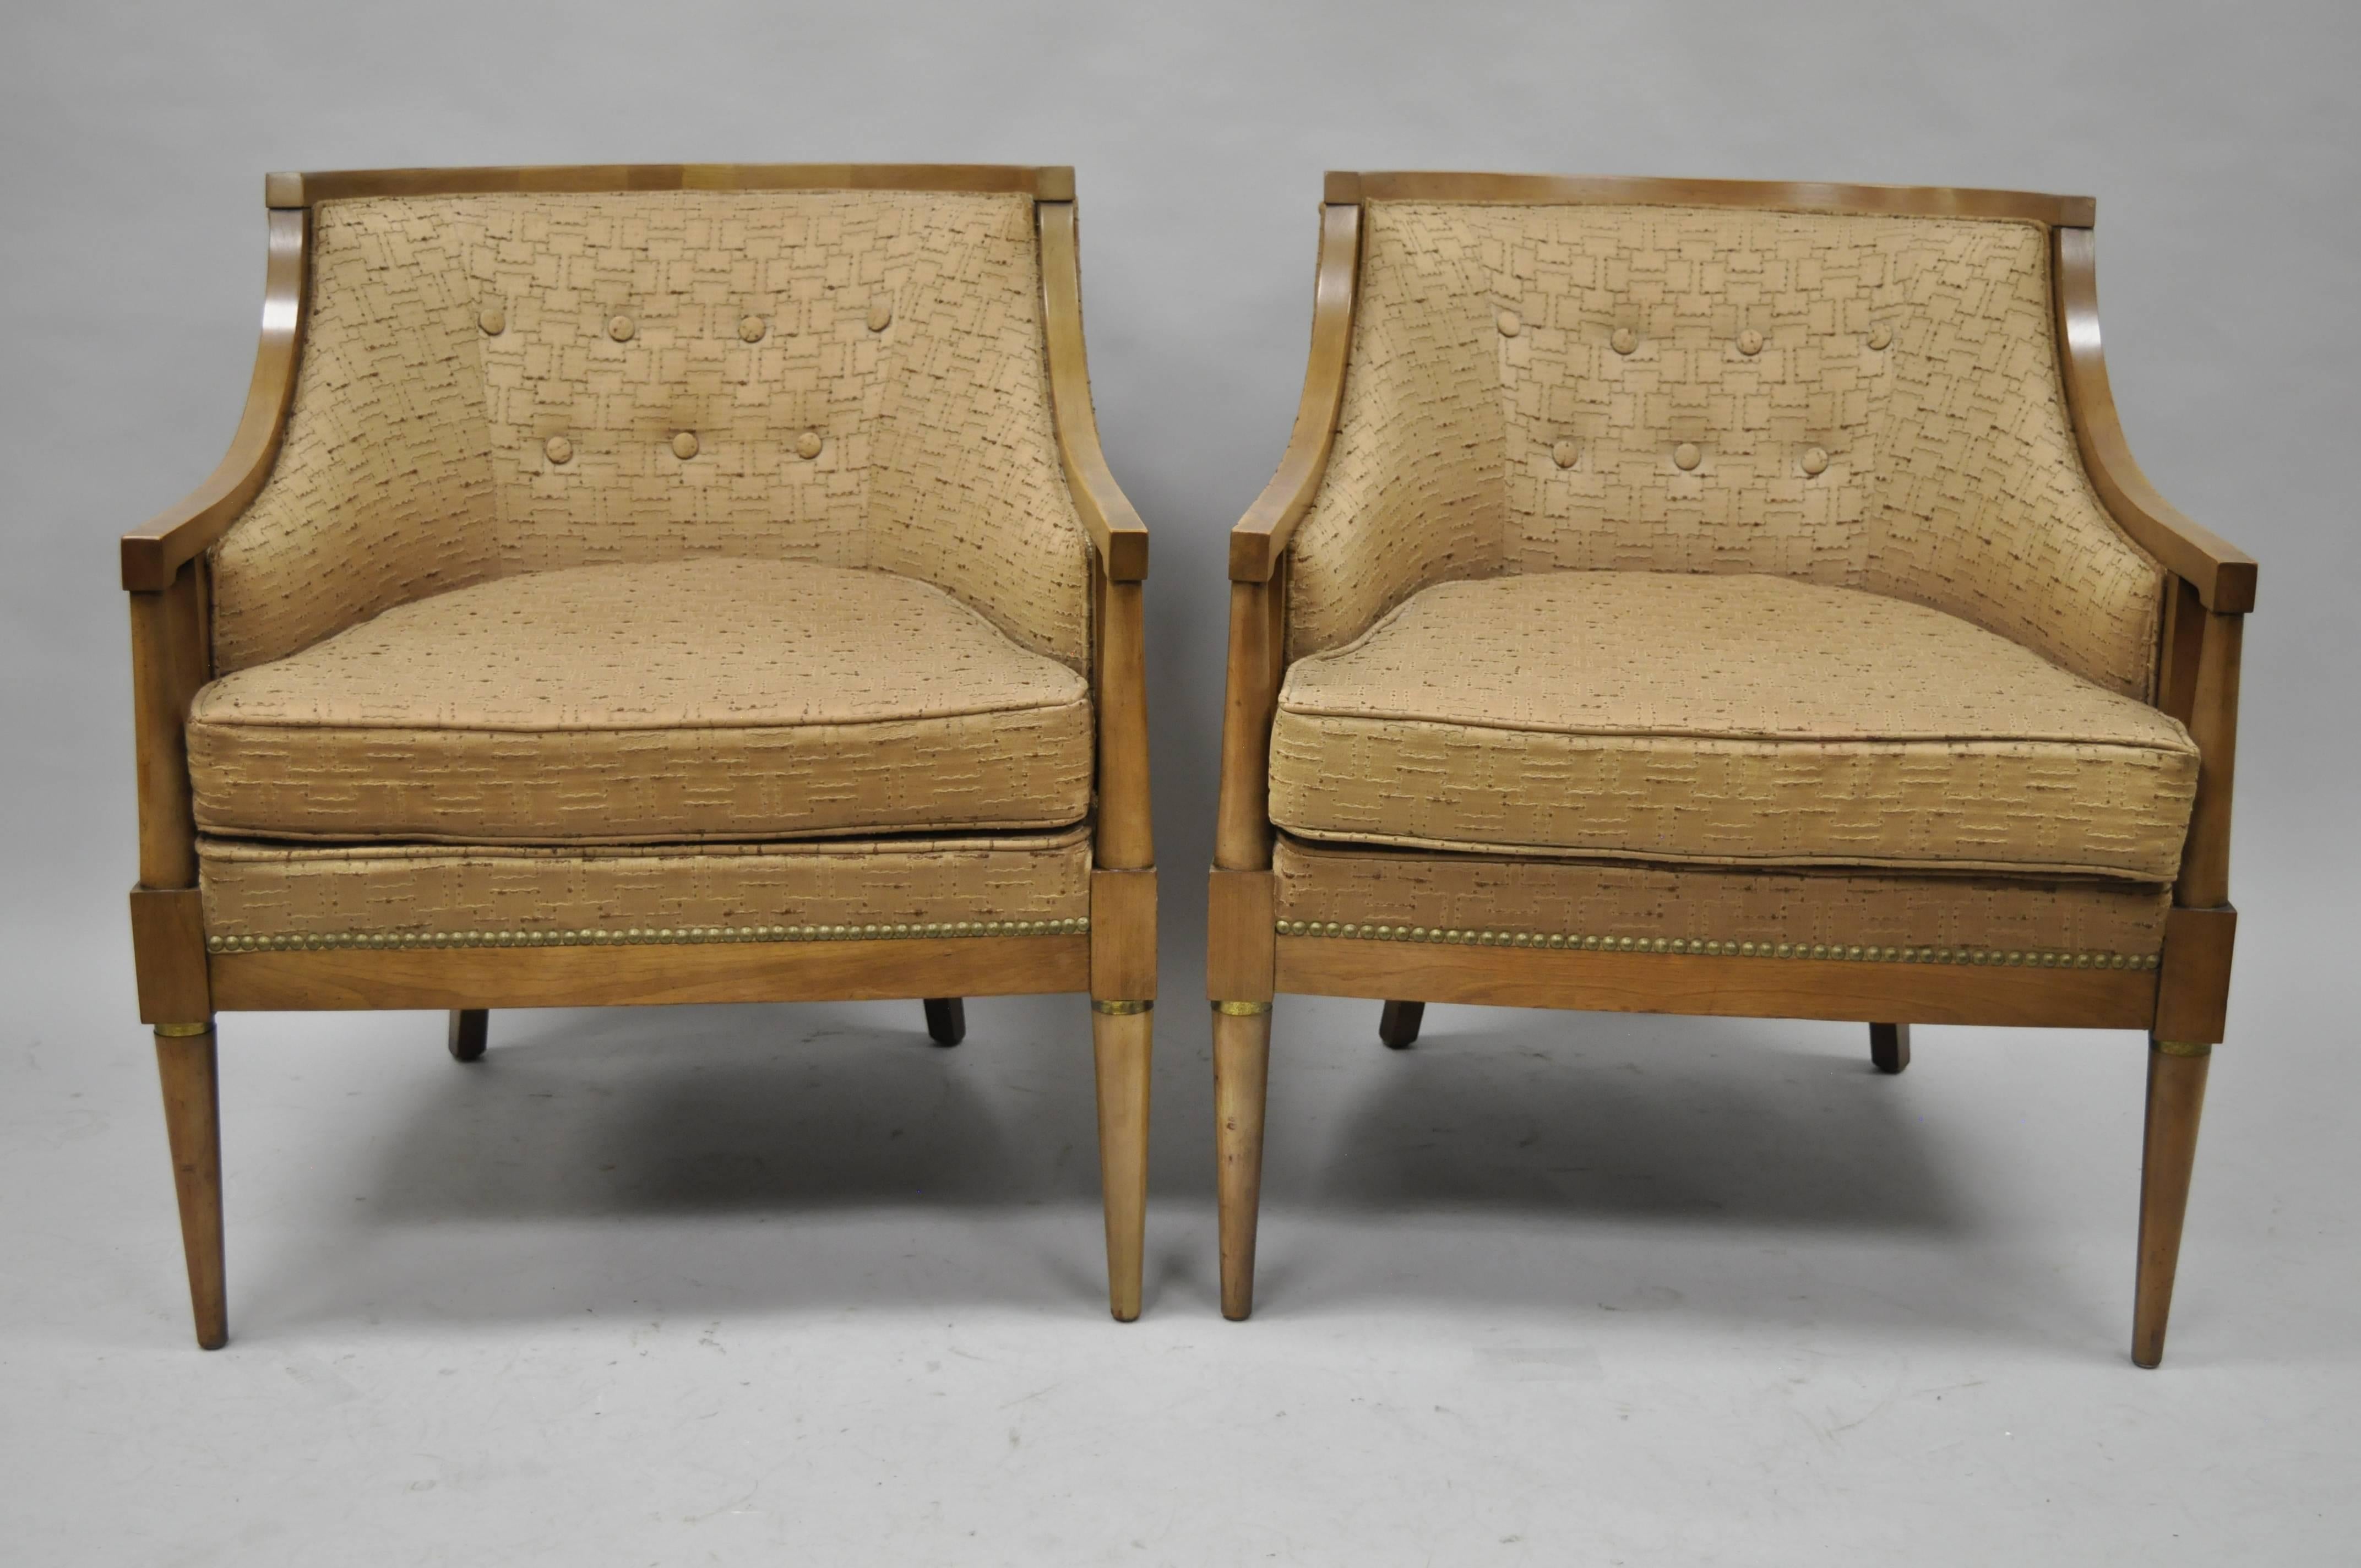 Pair of Vintage Mid-Century Modern Barrel Back Solid Wood Lounge Chairs in the Paul McCobb Style. Item features solid wood construction, barrel backs, tapered legs, brass rings, great style and form. Wonderful to lacquer and reupholster.